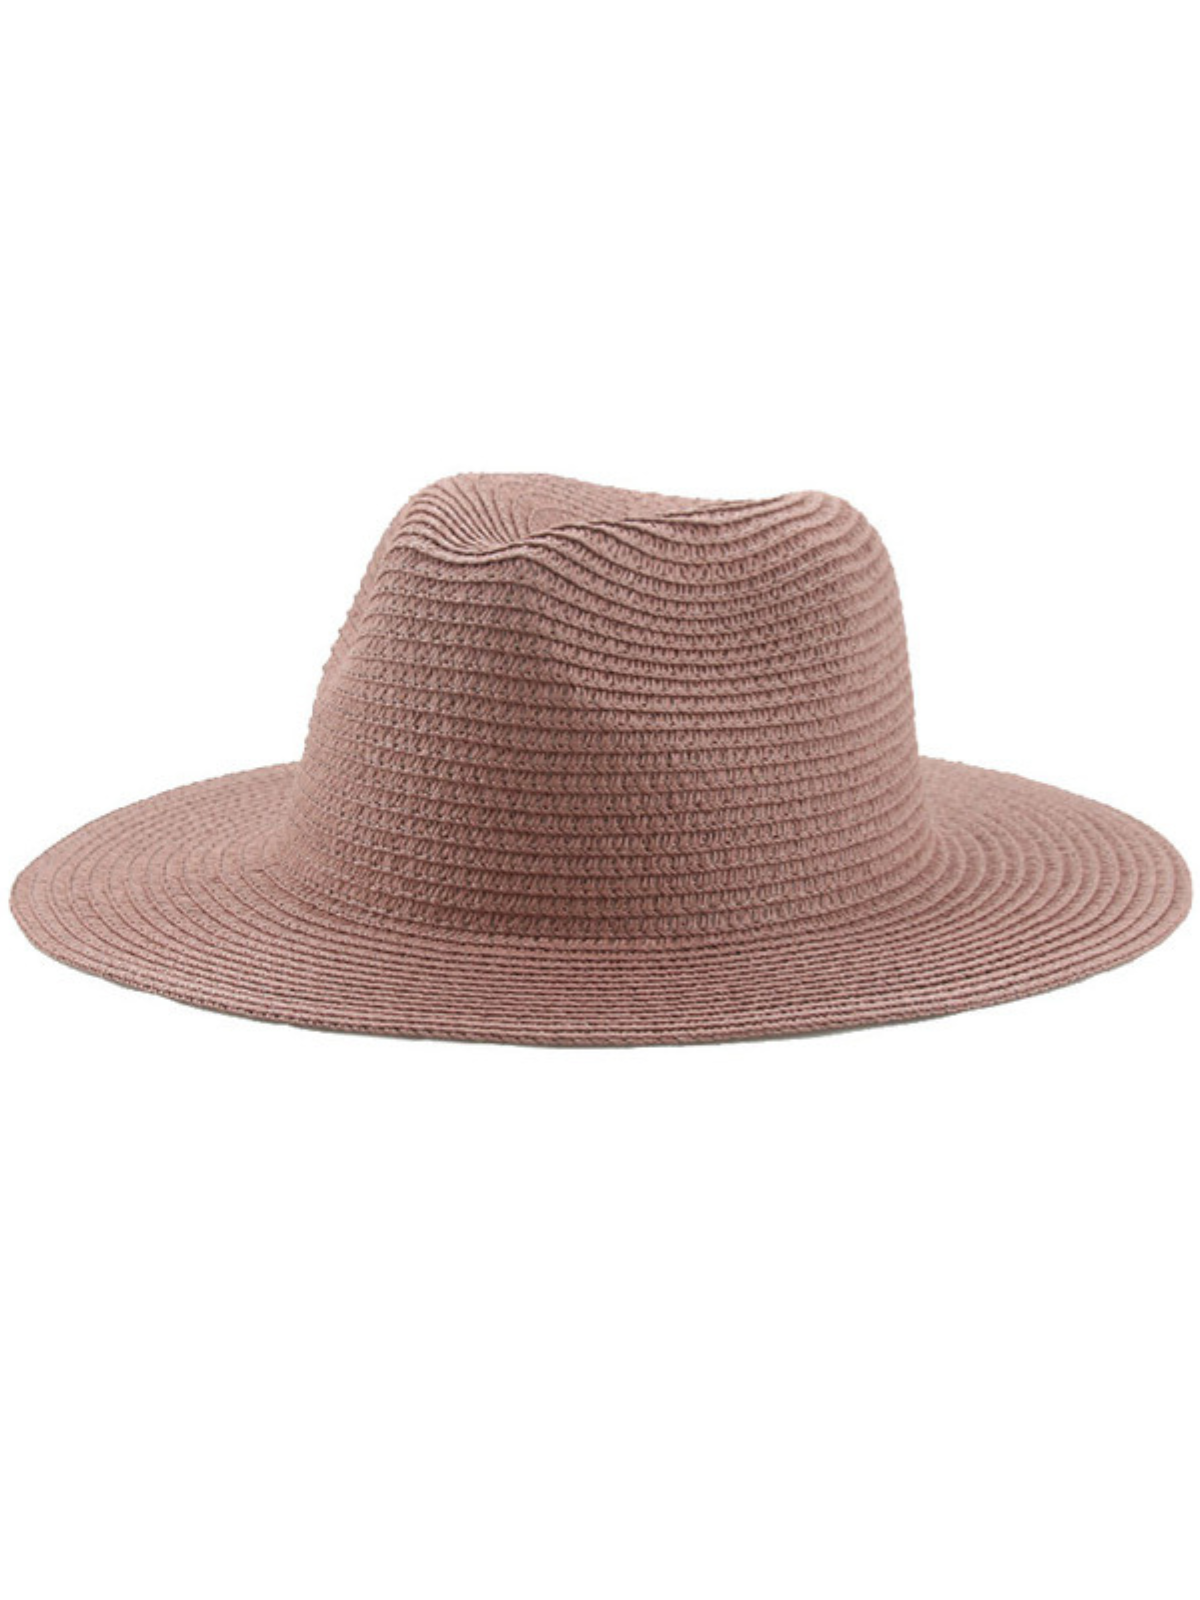 Not Your Basic Brown Sun Hat